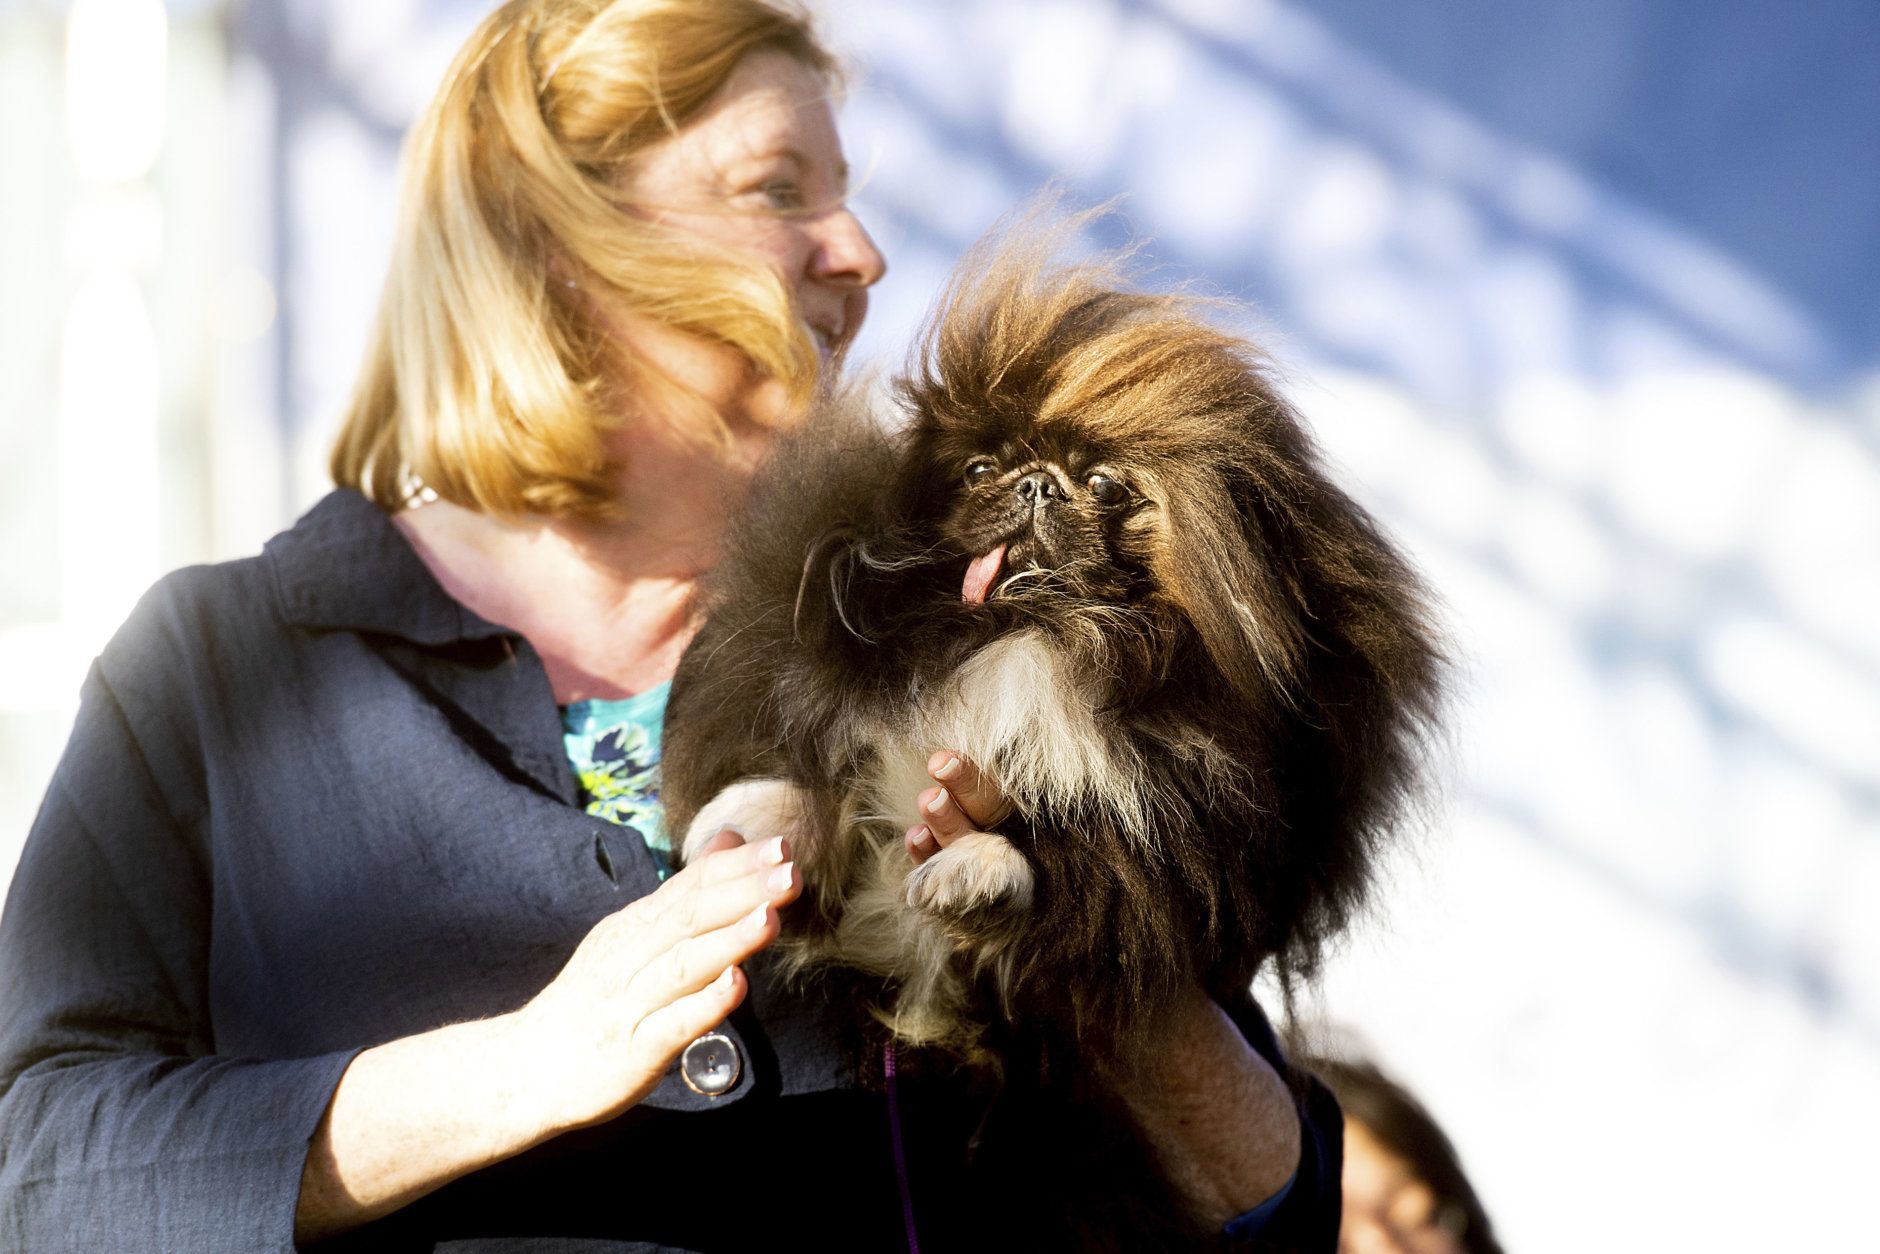 Wild Thang, a 3-year-old Pekingese, competes in the World's Ugliest Dog Contest with owner Ann Lewis at the Sonoma-Marin Fair in Petaluma, Calif., Friday, June 21, 2019. Wild Thing went on to win second place. (AP Photo/Noah Berger)